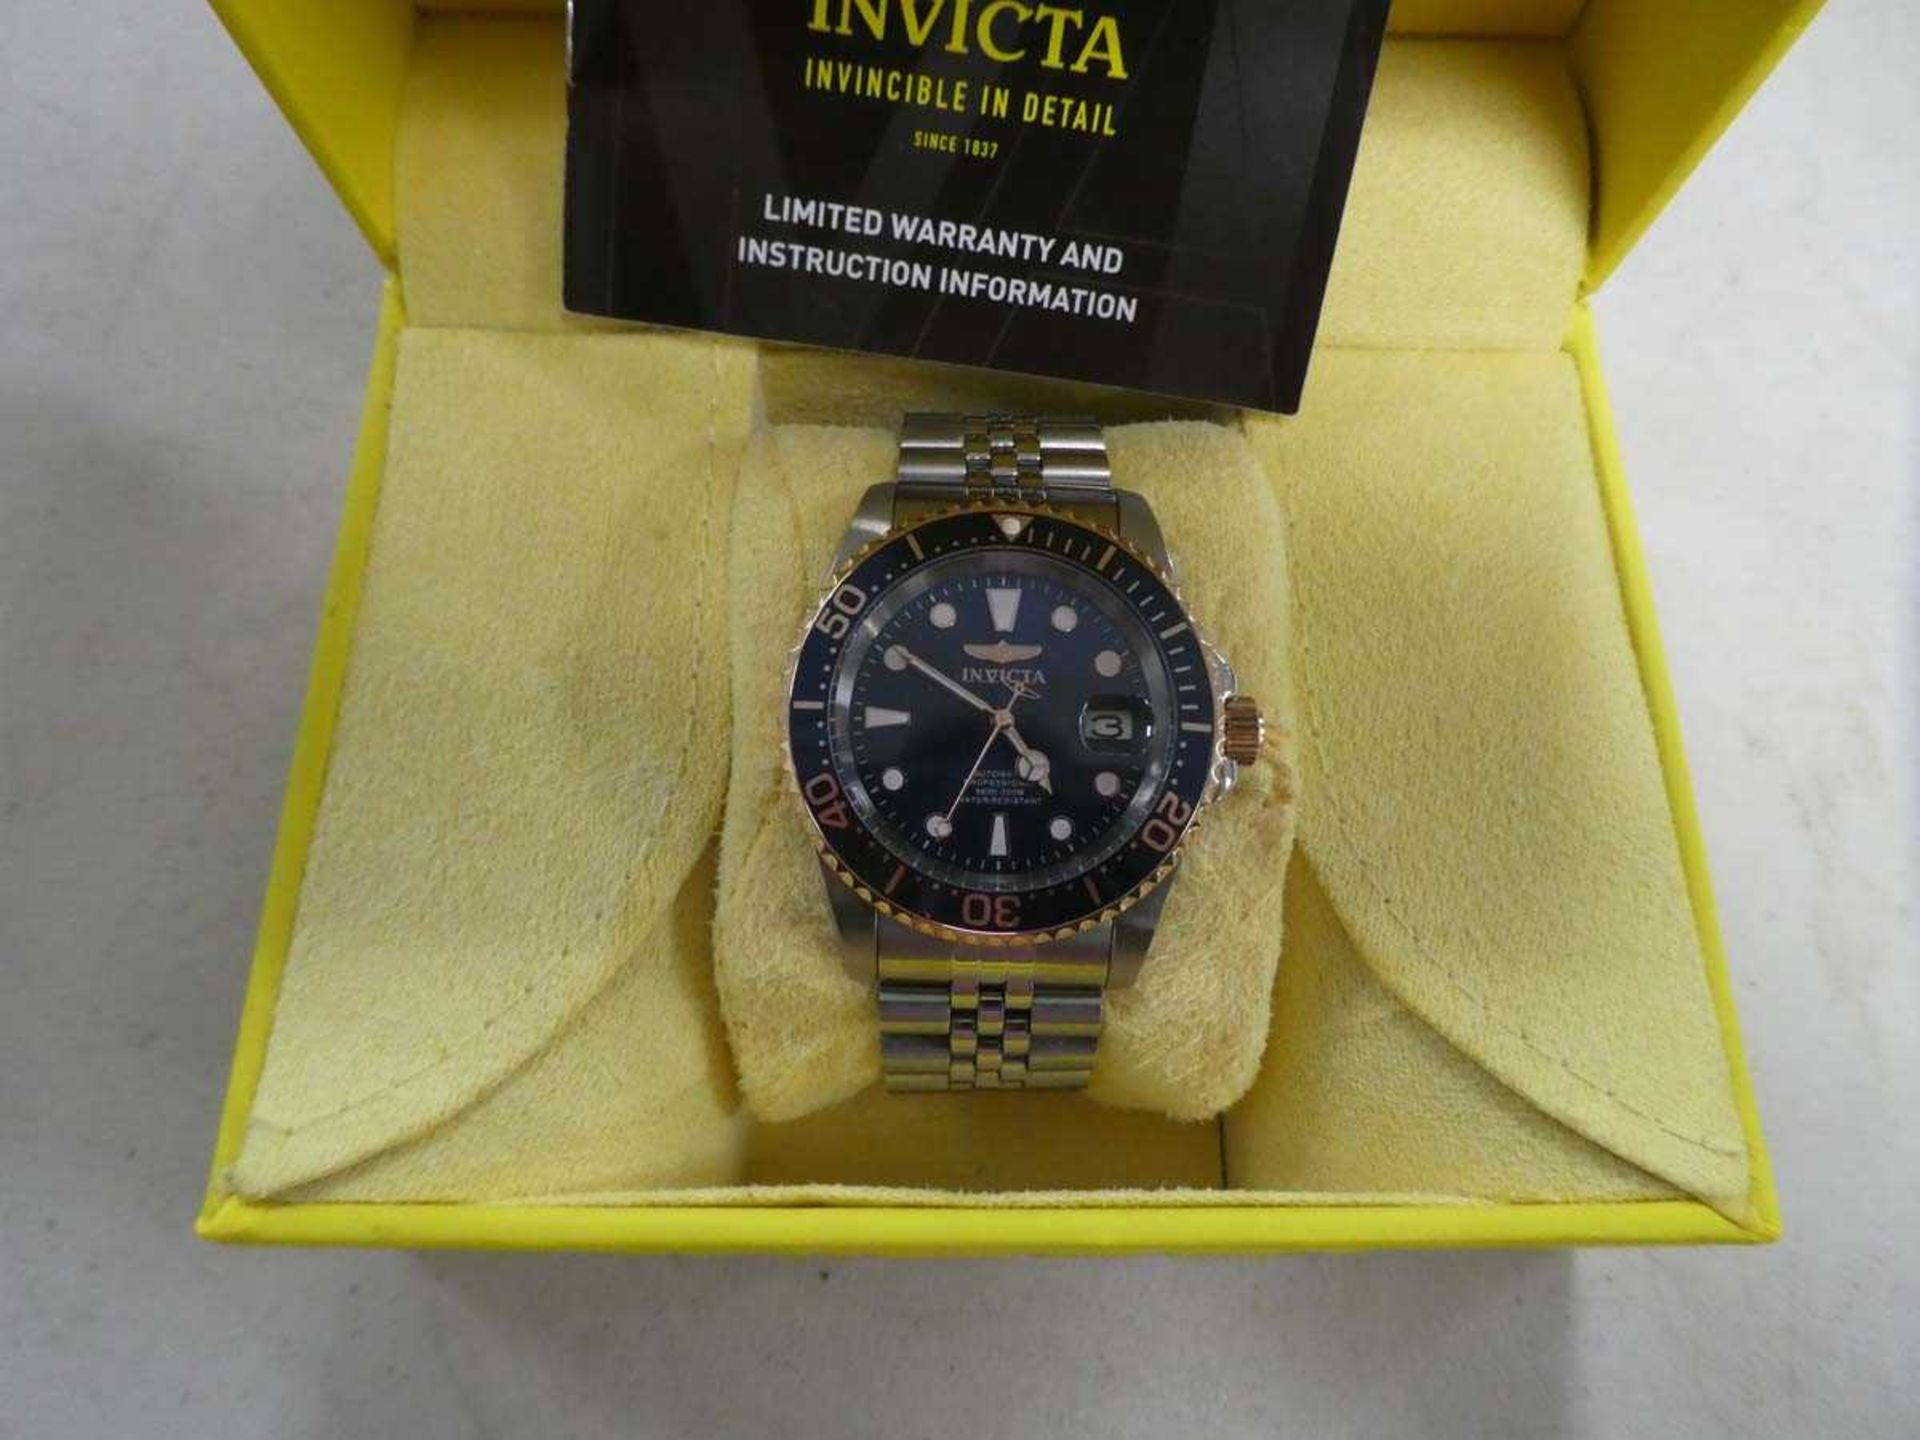 +VAT Gents Invicta wrist watch with box and instruction manual